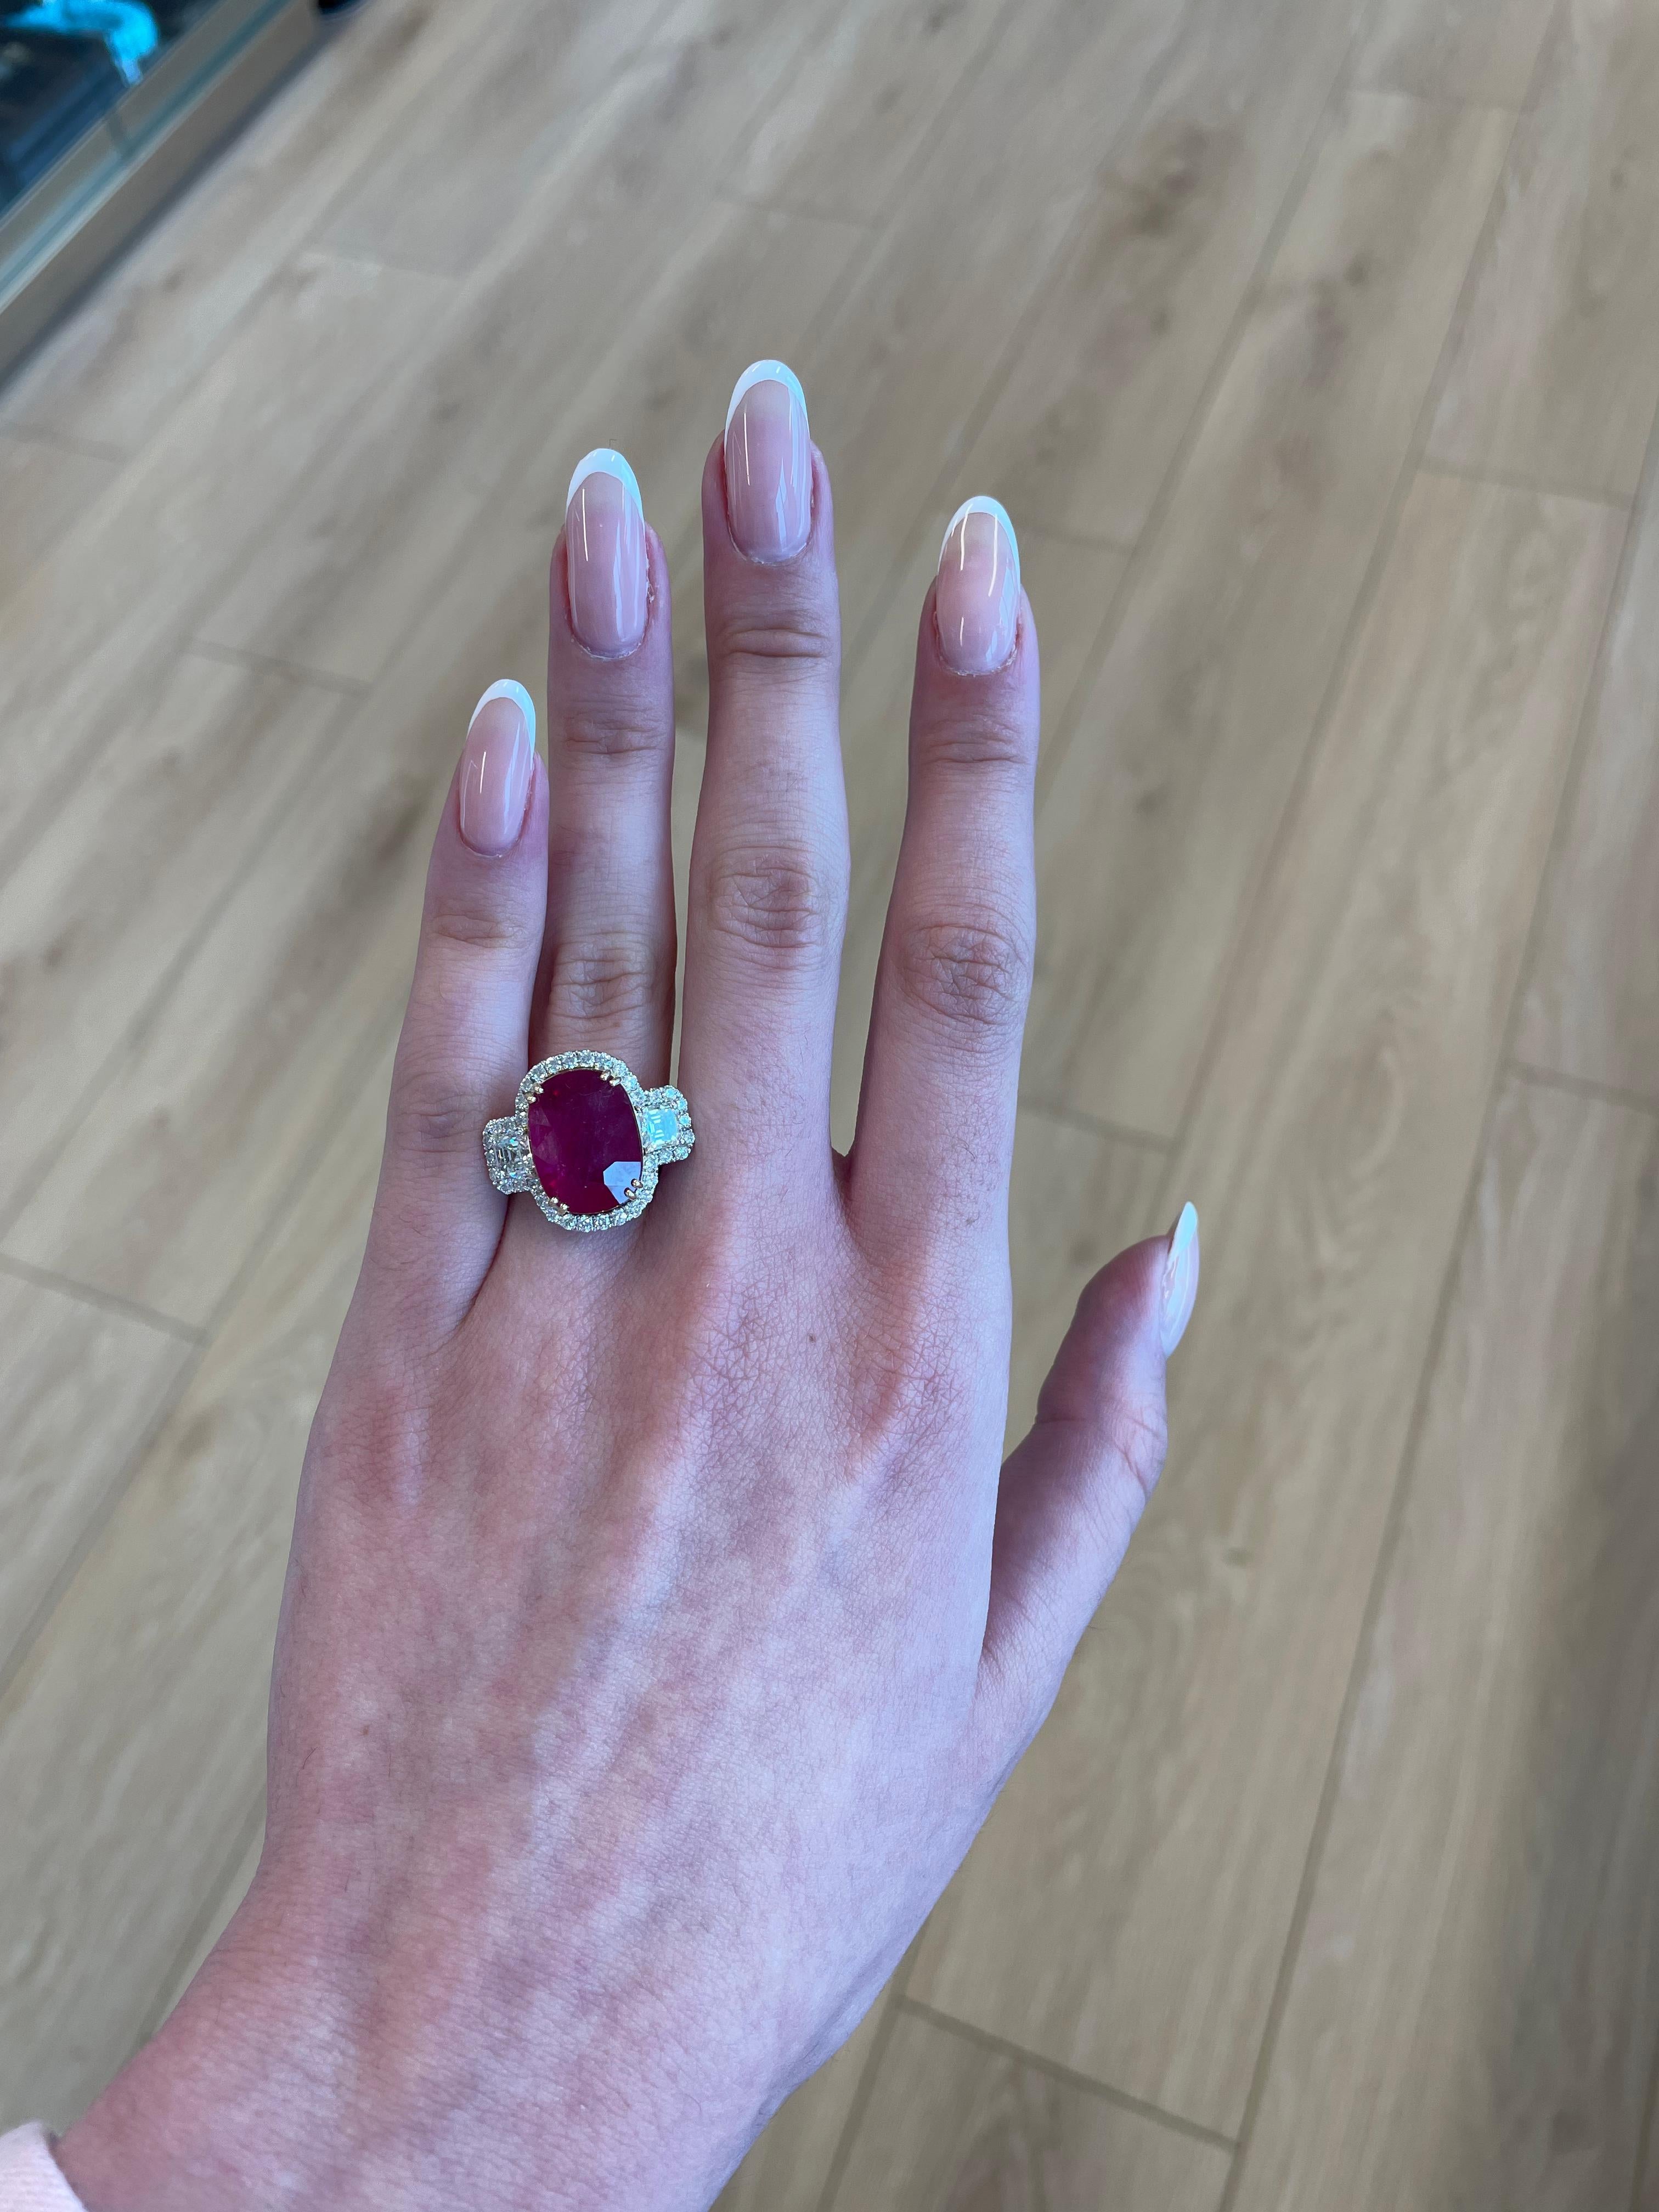 Stunning diamond and diamond three stone ring with halo. High jewelry by Alexander Beverly Hills. 
12.33 carats total gemstone weight.
10.24 carat oval ruby, GIA certified heat. 2 asscher cut diamonds, 1.12 carats. Approximately G/H color and VS